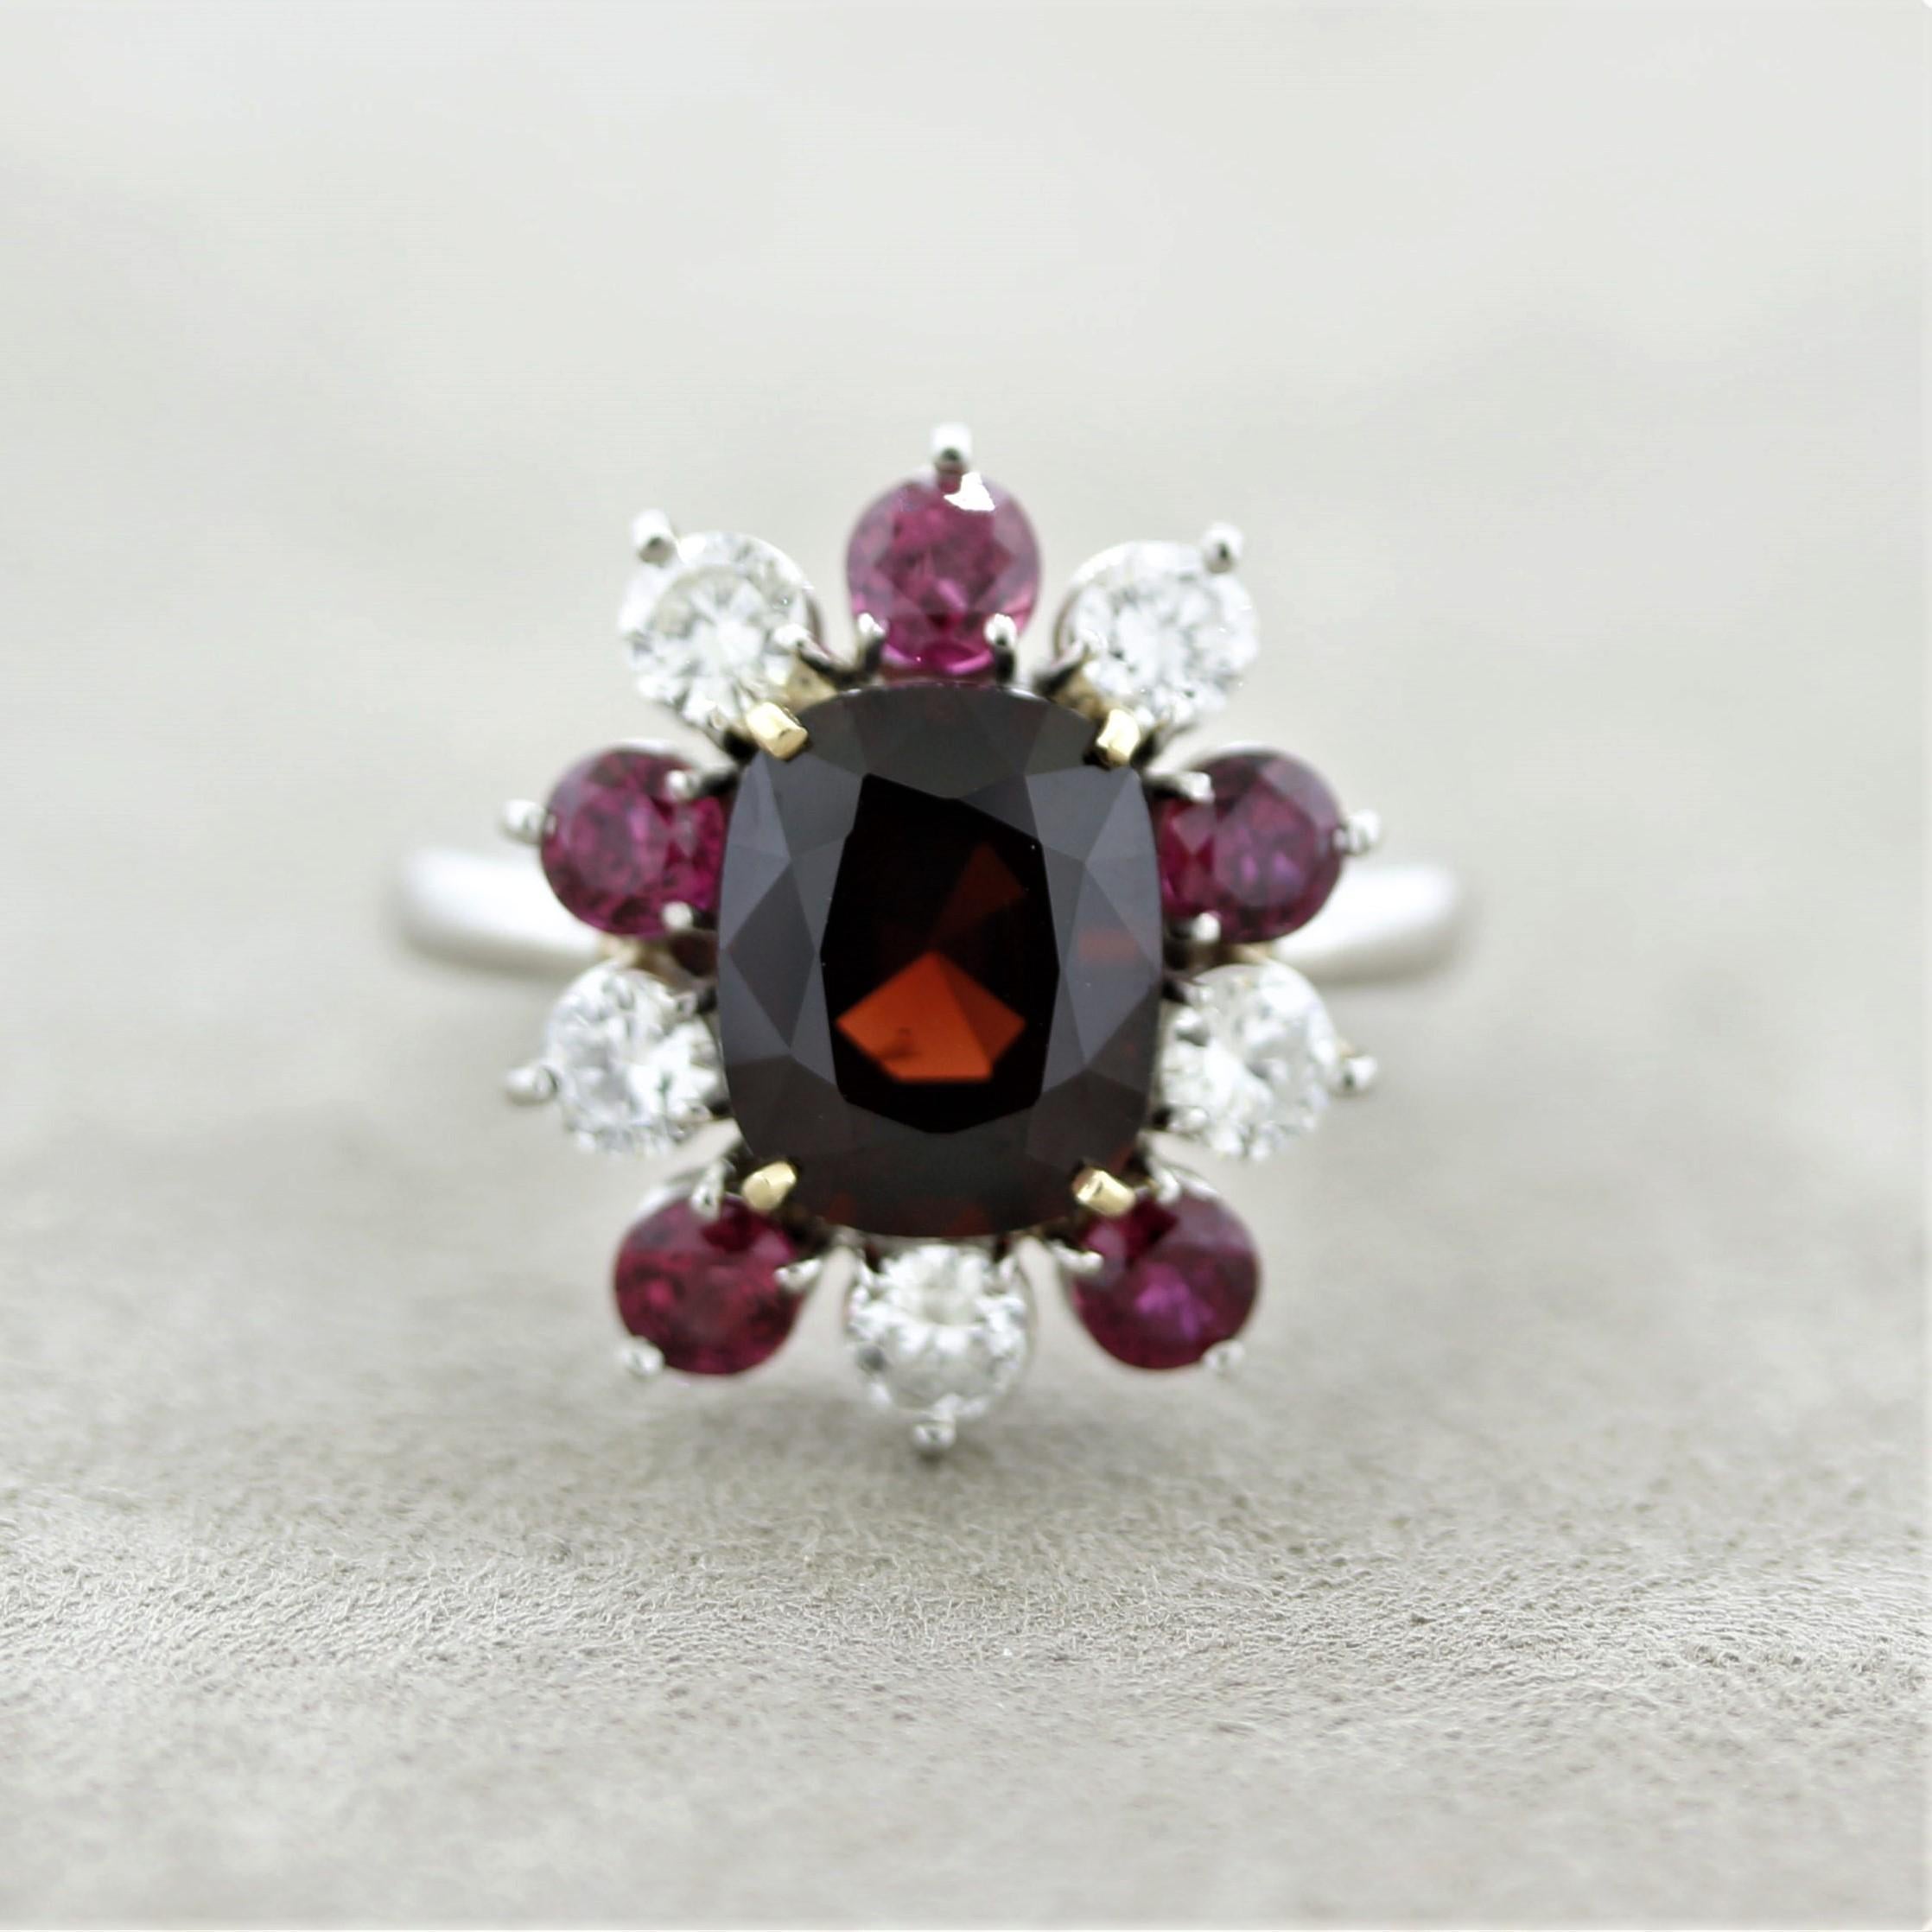 A rich deep red spinel weighing 3.84 carats takes center stage! It has a lovely cushion shape and is certified by the GIA as natural with no treatments of any kind. It is accented by round-cut diamonds and rubies which run around the spinel weighing